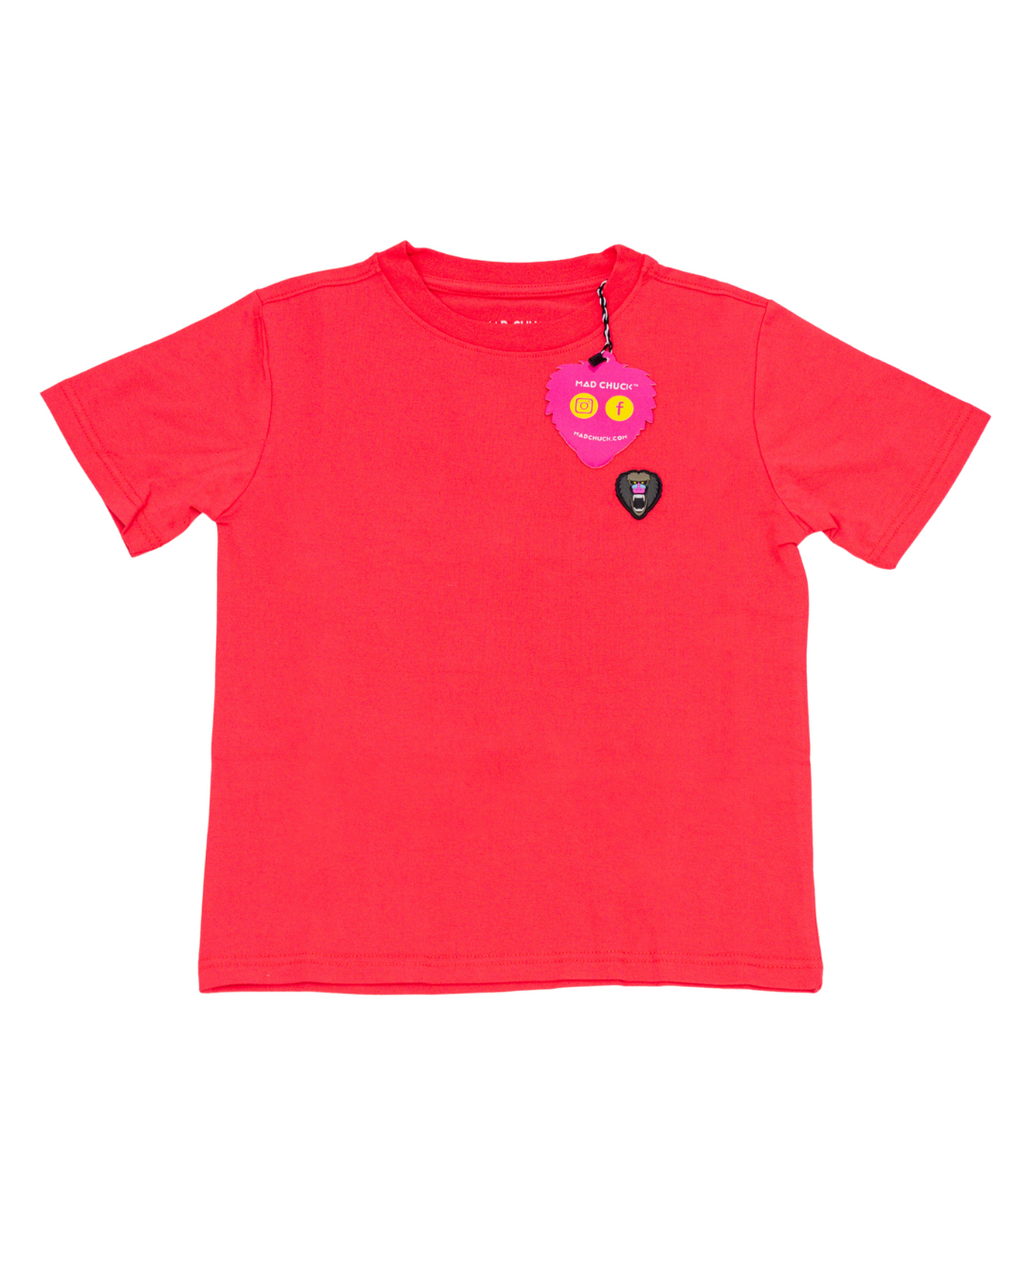 FIRE CORAL CREW NECK T SHIRT NEW RUBBER PATCH